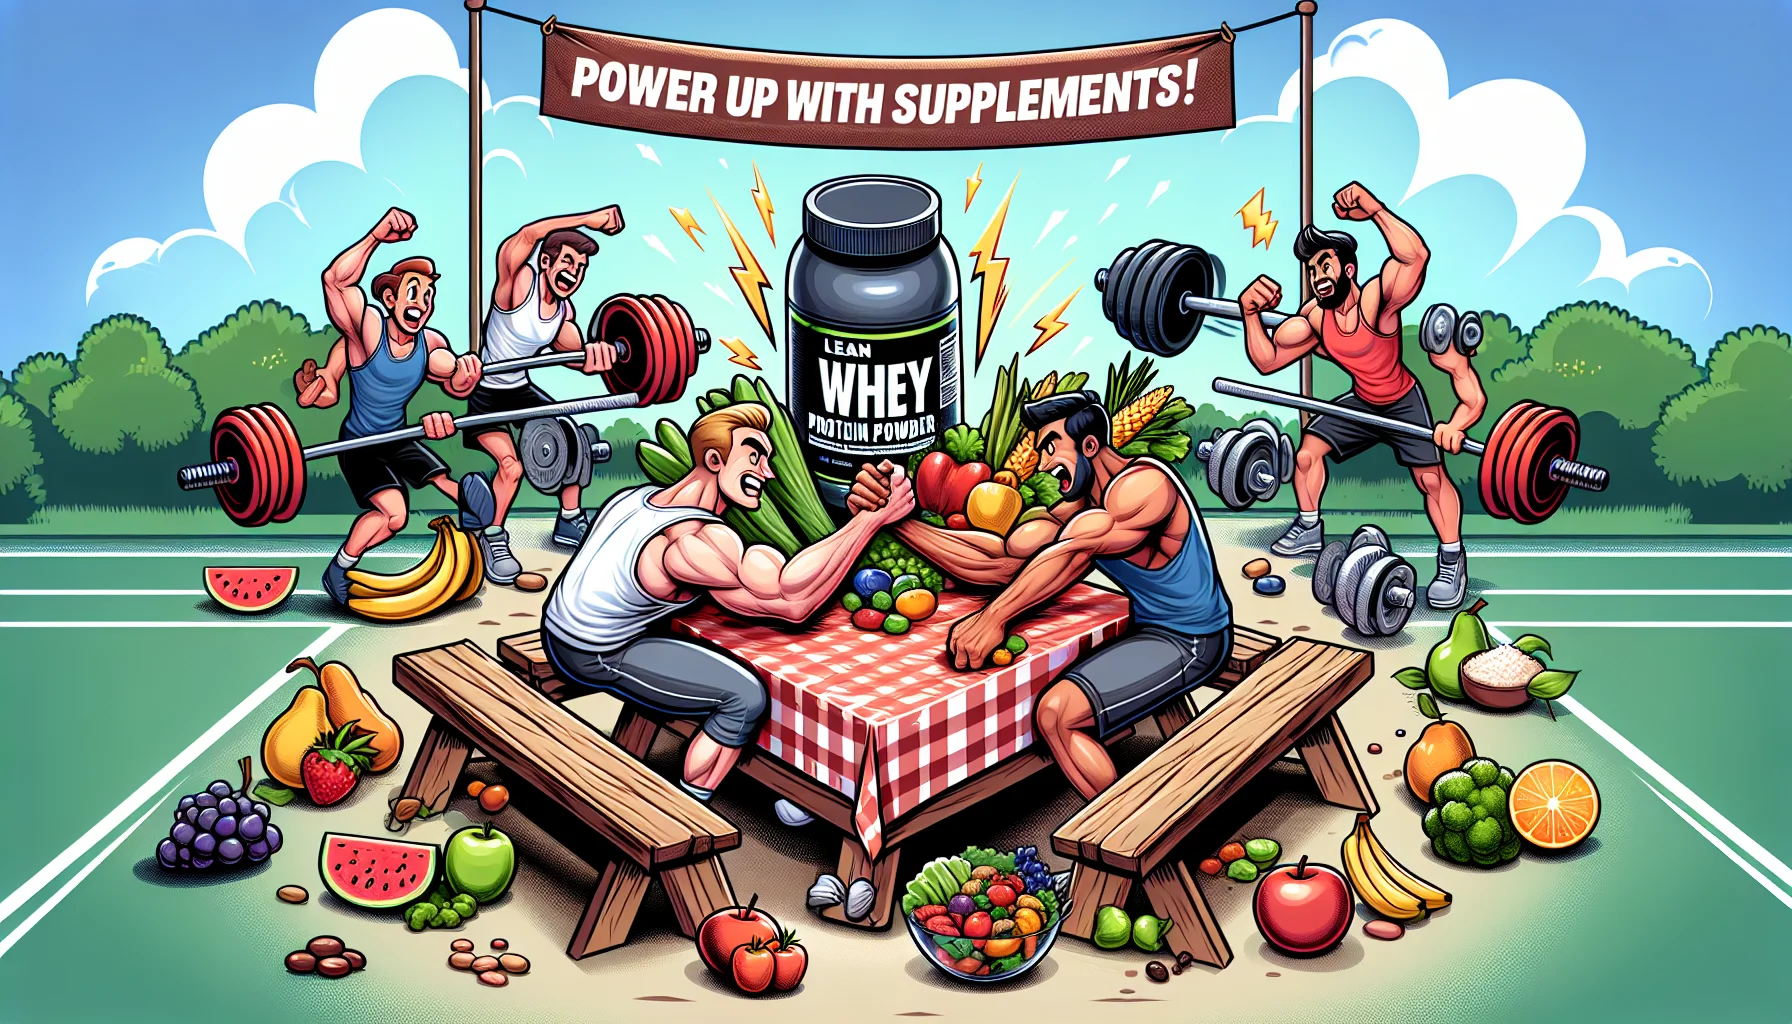 Generate an image showcasing a comic scene where a container of lean whey protein powder is shown having a friendly arm wrestling match against a line of various fruits, vegetables, and whole grains on a wooden picnic table. They are all surrounded by uplifted dumbbells, sports gear, and fitness enthusiasts cheering them on. The setting should be a bright sunny day in a park. There is a banner unfurled in the backdrop that says 'Power up with Supplements!' to encourage the use of supplements for sports nutrition.